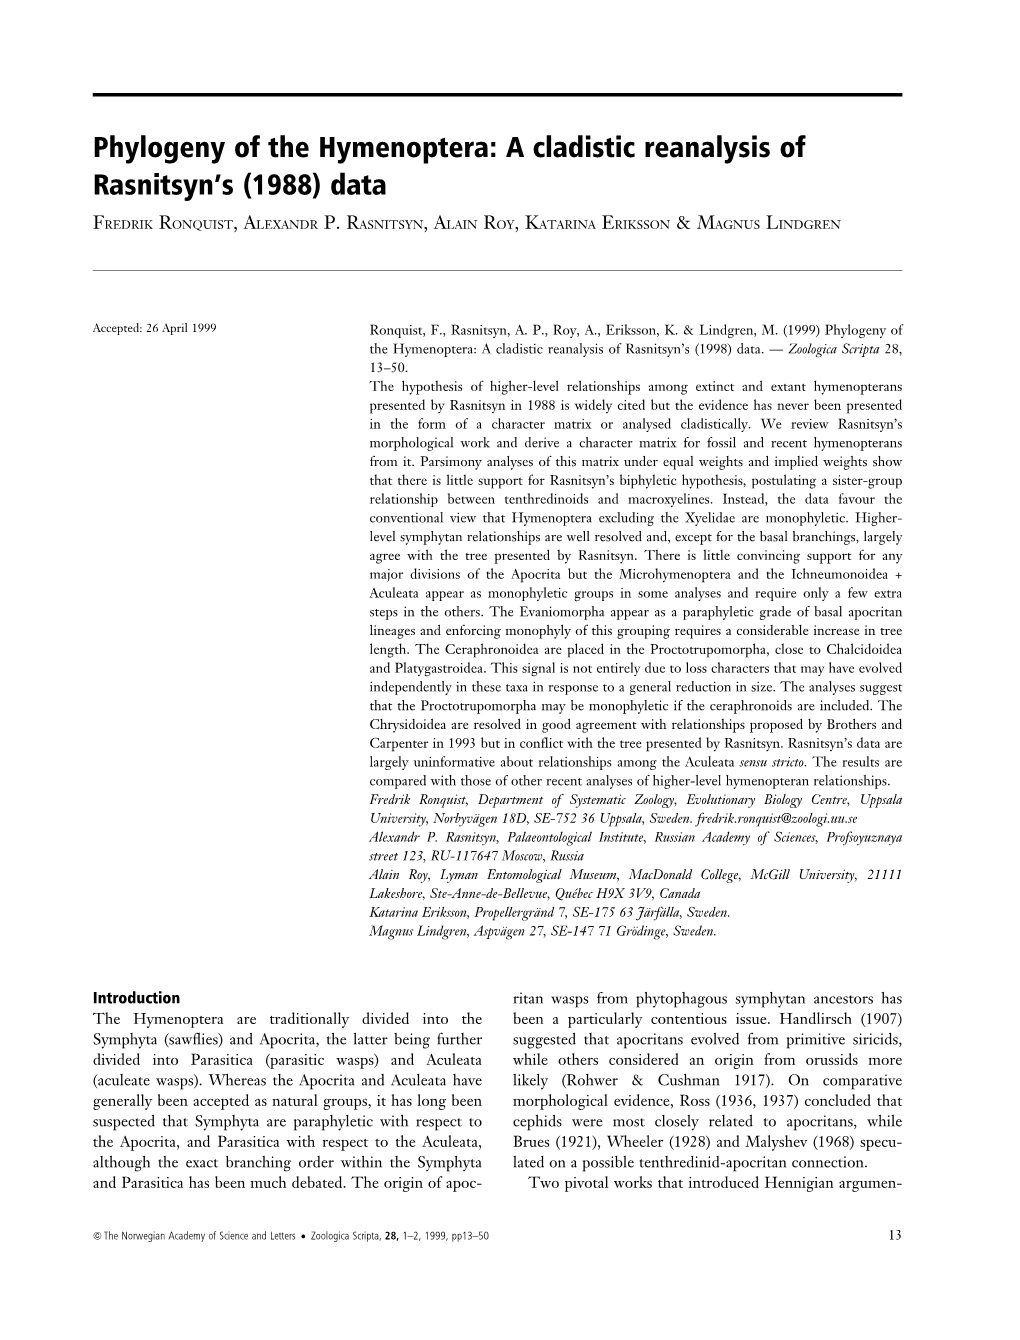 Phylogeny of the Hymenoptera: a Cladistic Reanalysis of Rasnitsyn's (1988) Data